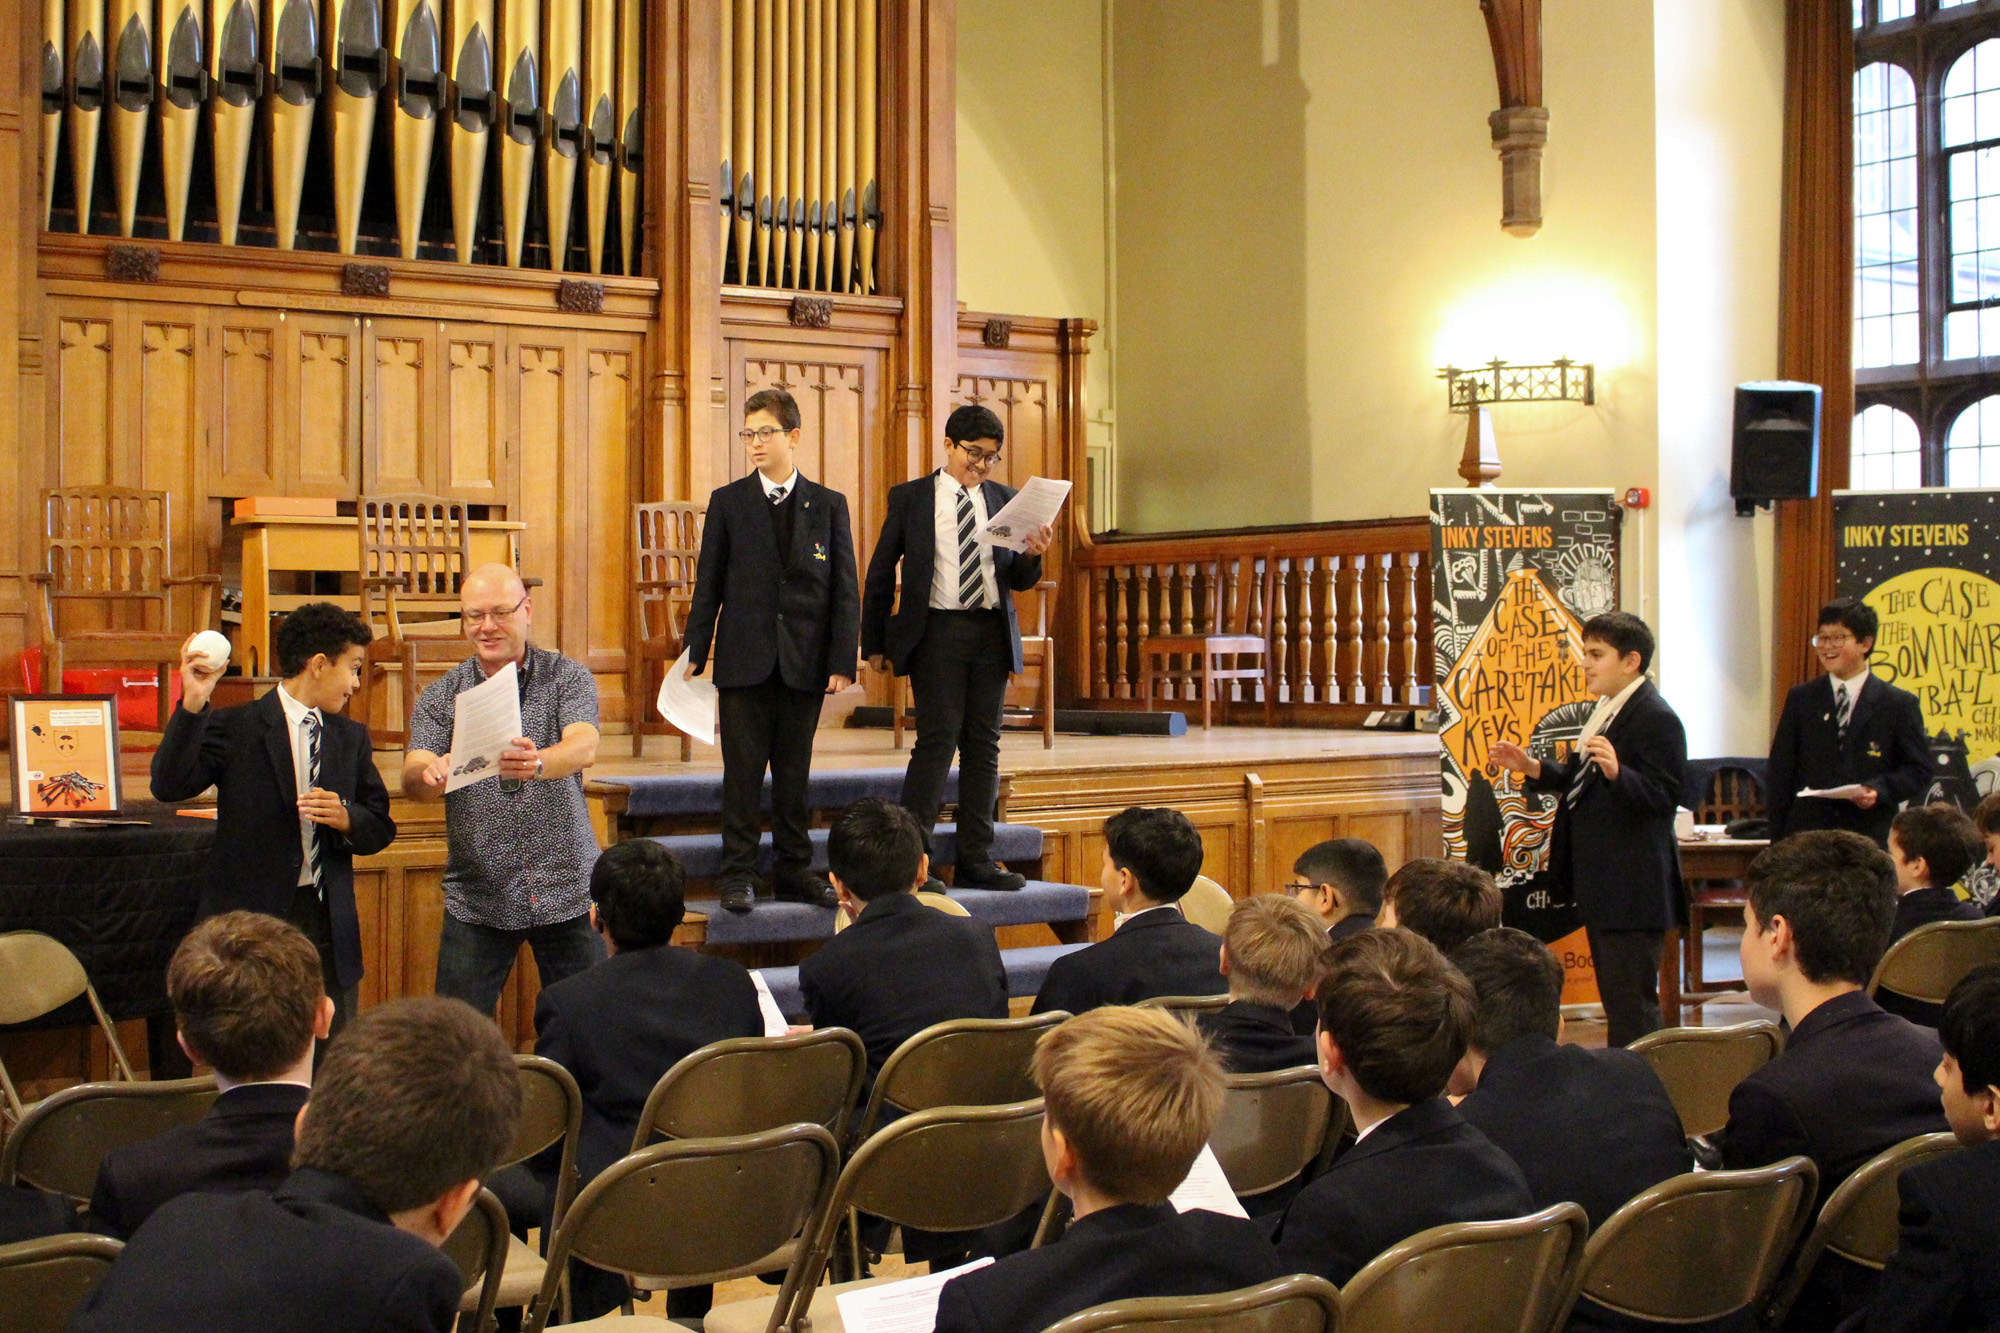 Author Chris Martin and Boys' Division pupils acting out a scene from 'The Case of the Abominable Snowball'